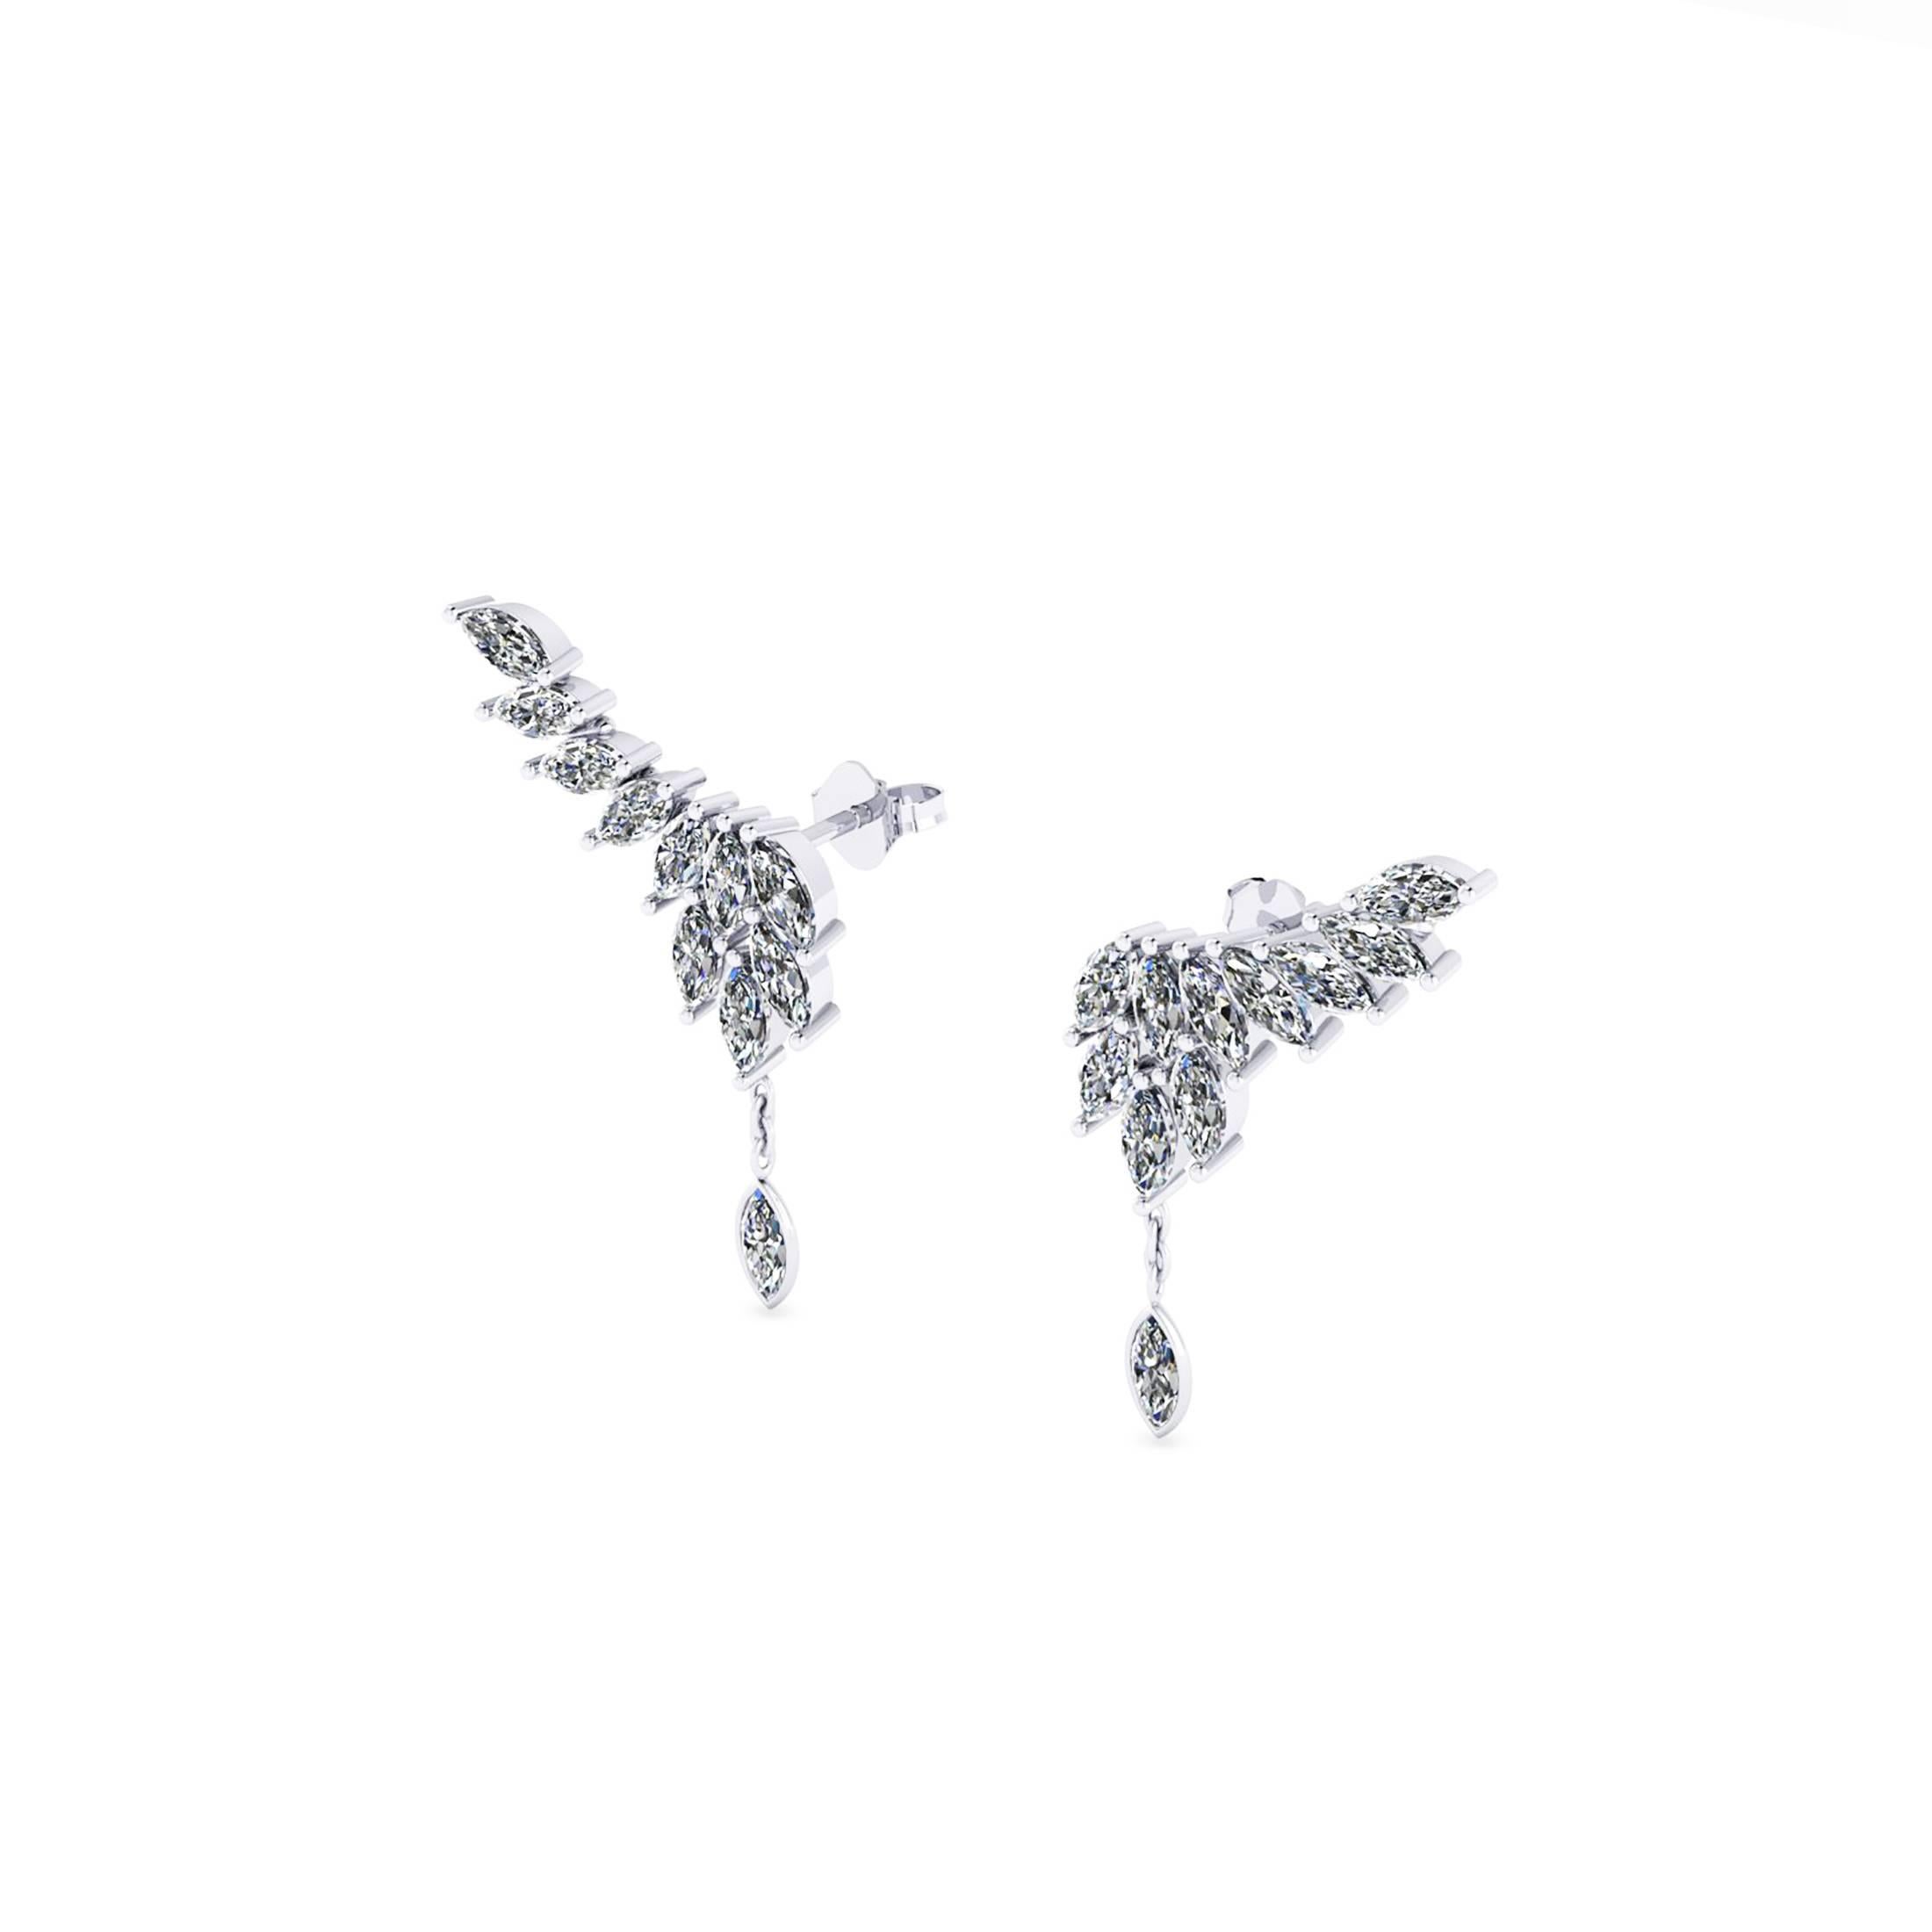 FERRUCCI 2.75 carats Marquise shape Diamonds wing earrings made in 18k white gold in New York City by Italian master jeweler and designer Francesco Ferrucci, modern stylist look for every sophisticated woman of every age, pret-a-porter, easy to wear